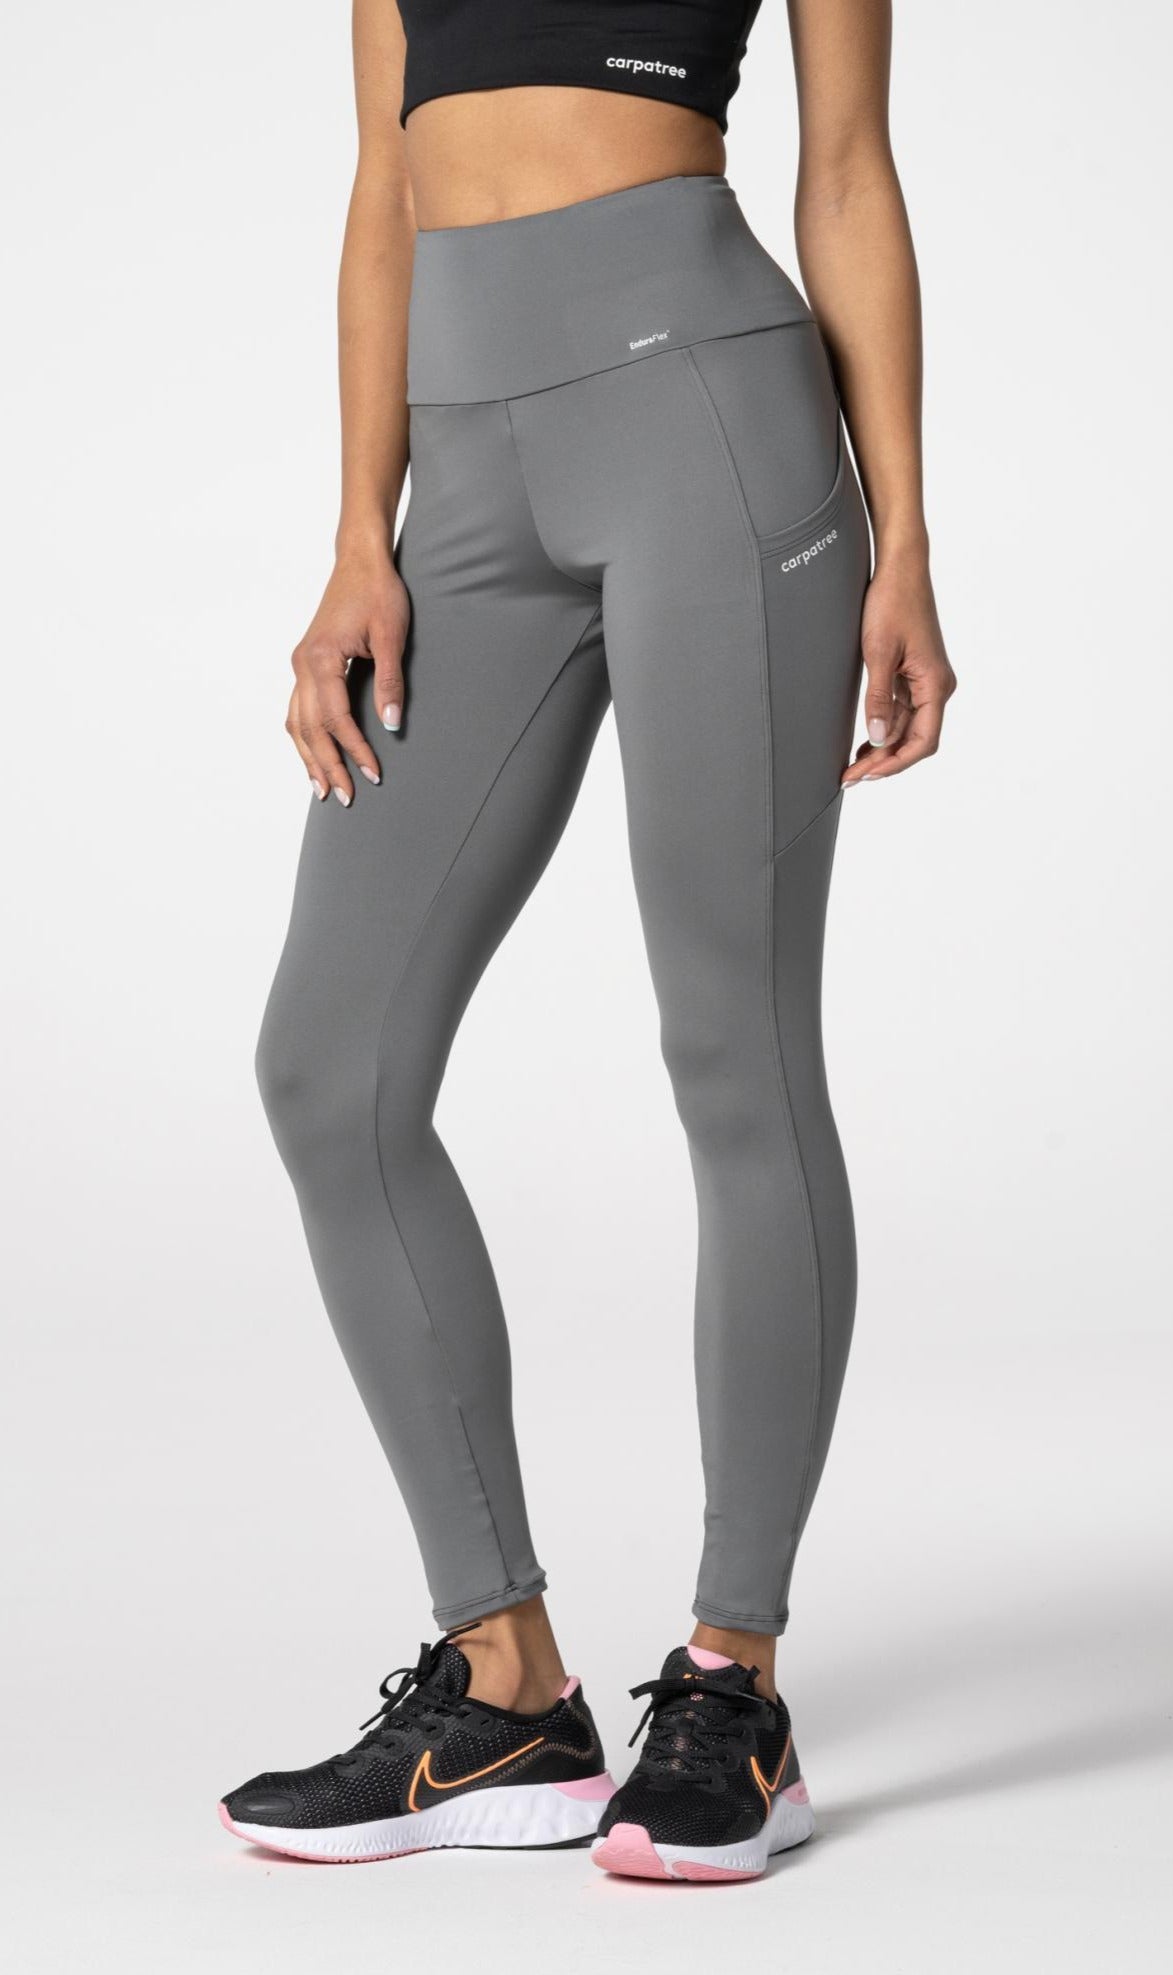 Carpatree Libra Pocket Leggings - Grey high waisted sports leggings with 3 pockets, 2 side pockets and a hidden pocket in the waistband.